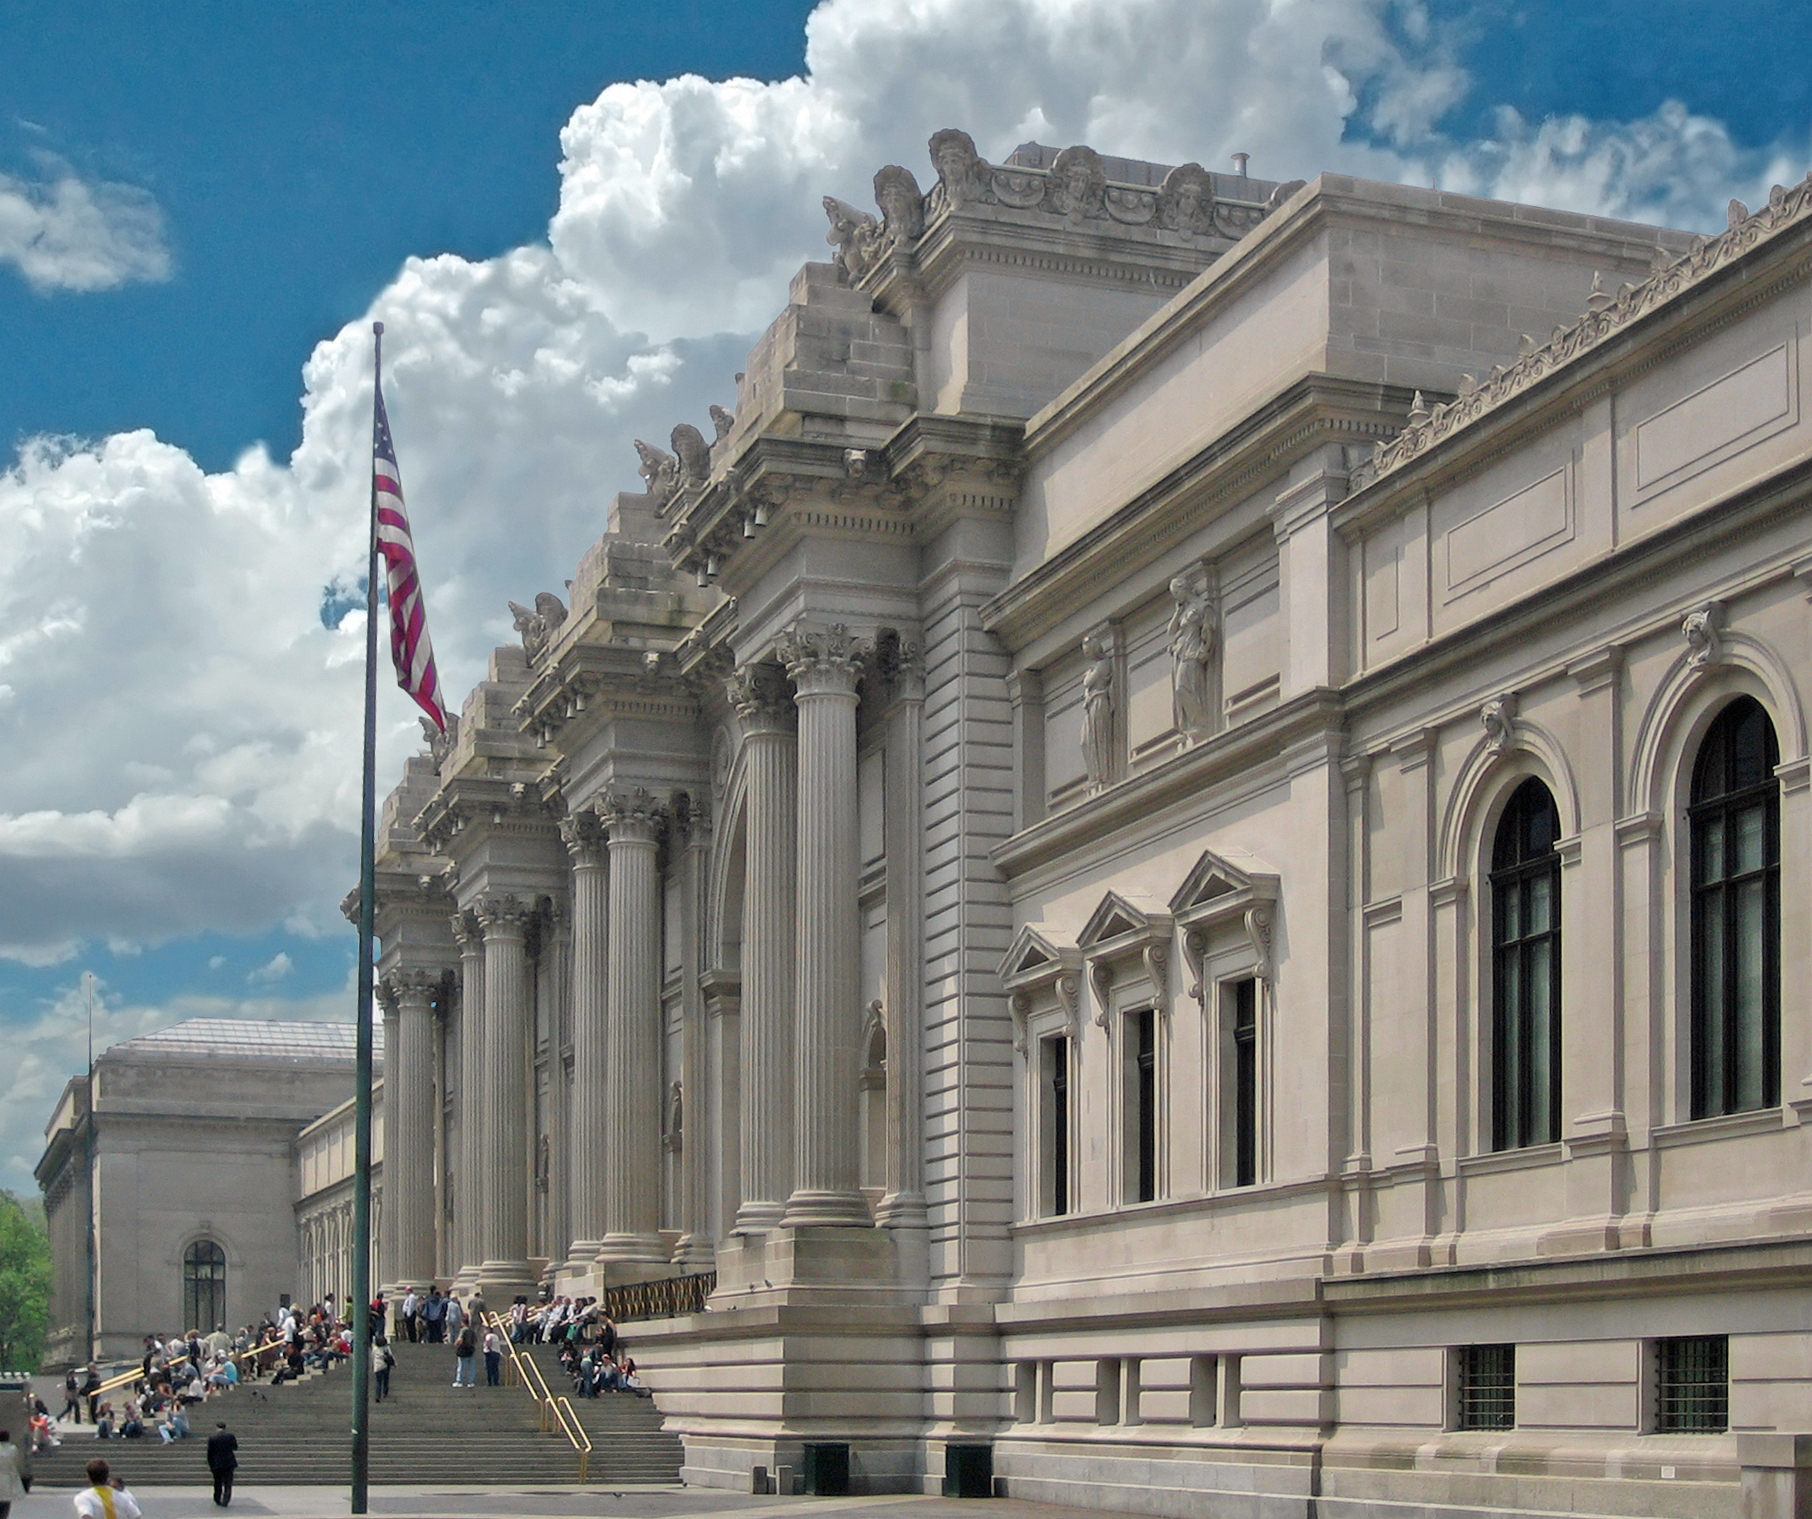 The Metropolitan Museum of Art: Artistic Lighthouse Featuring Millennia of Civilization in Central Bustling New York